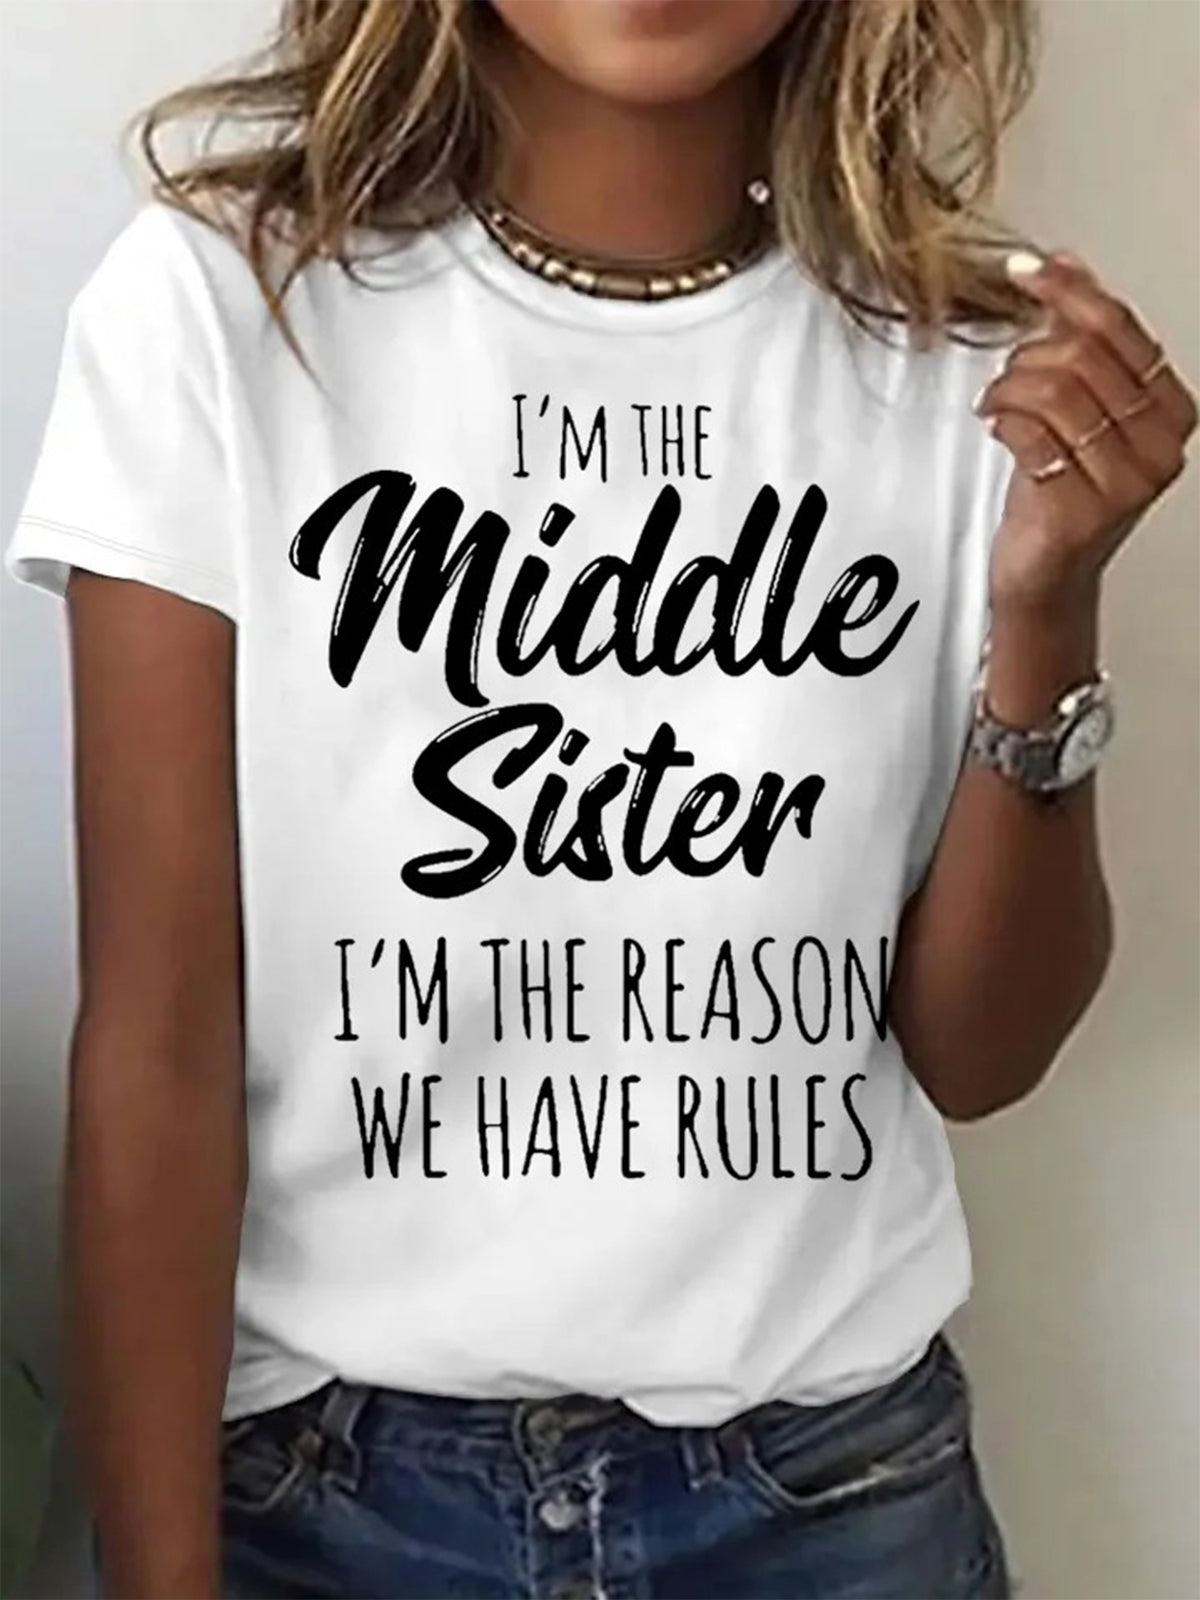 Funny Middle Sister Casual Letters Crew Neck T-shirt